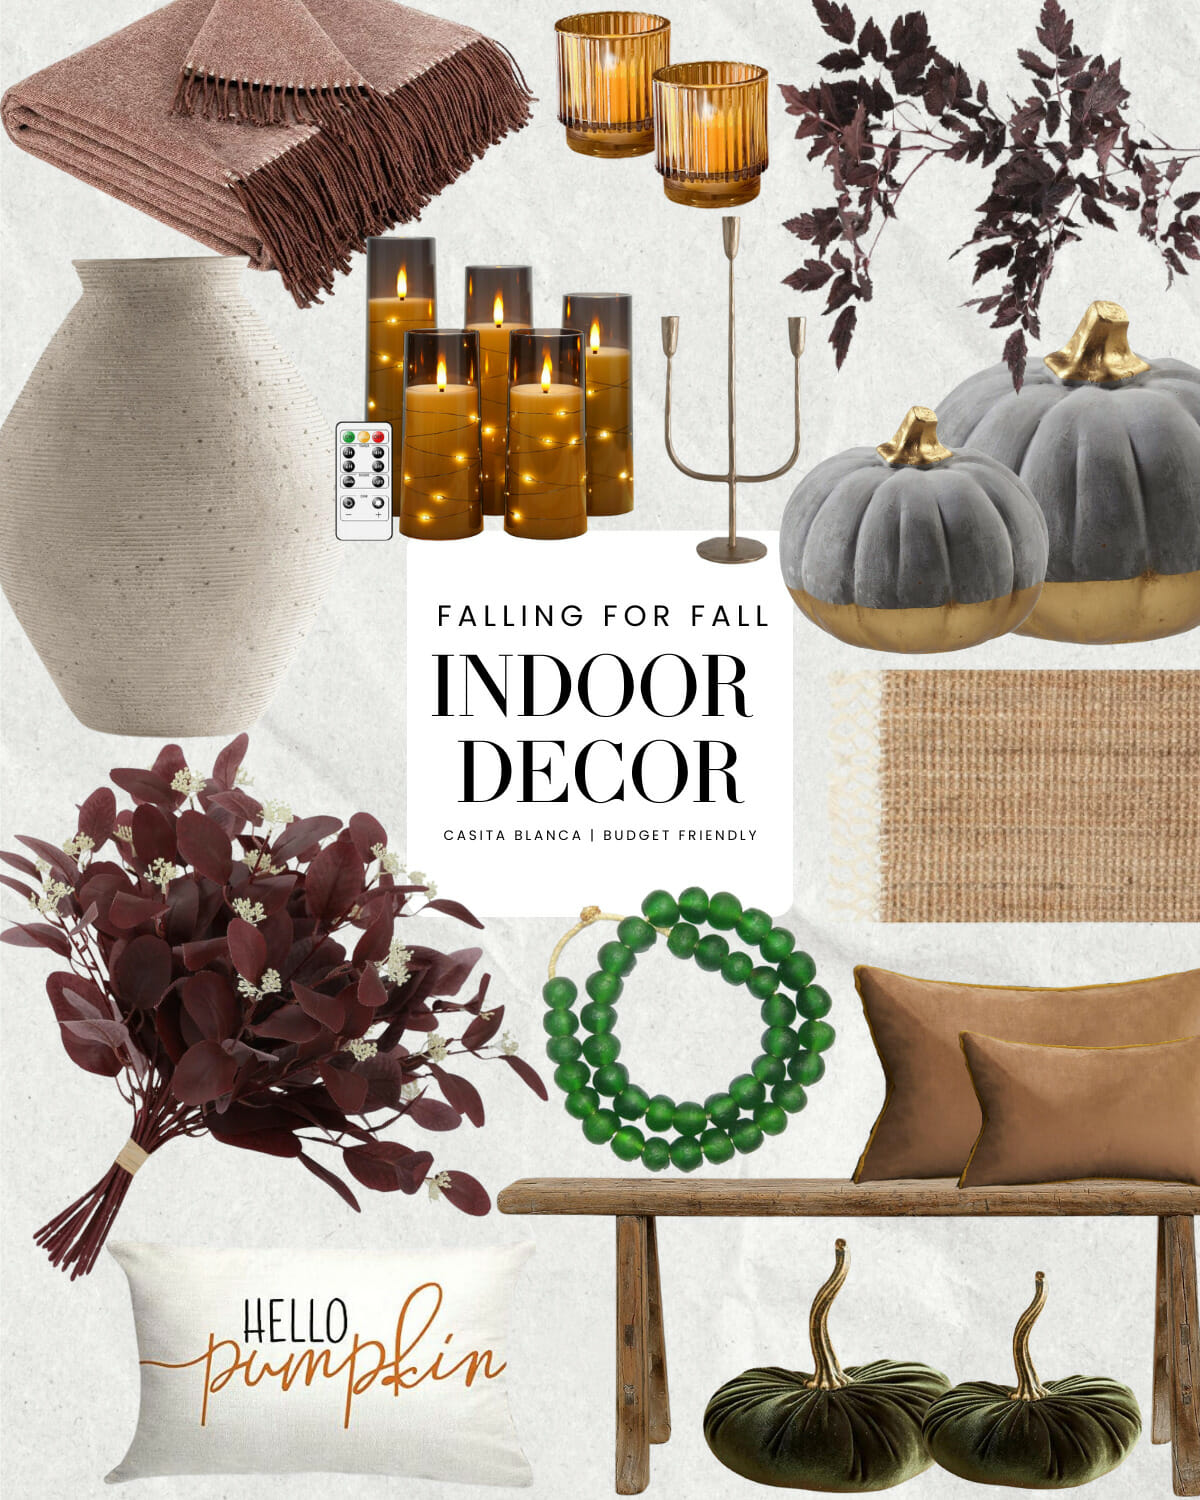 fall must haves | #fall #indoor #decor #falldecor #halloween #homedecor #pillow #bench #floral #fauxfloral #beads #candle #lighting #pumpkin #rug #vase